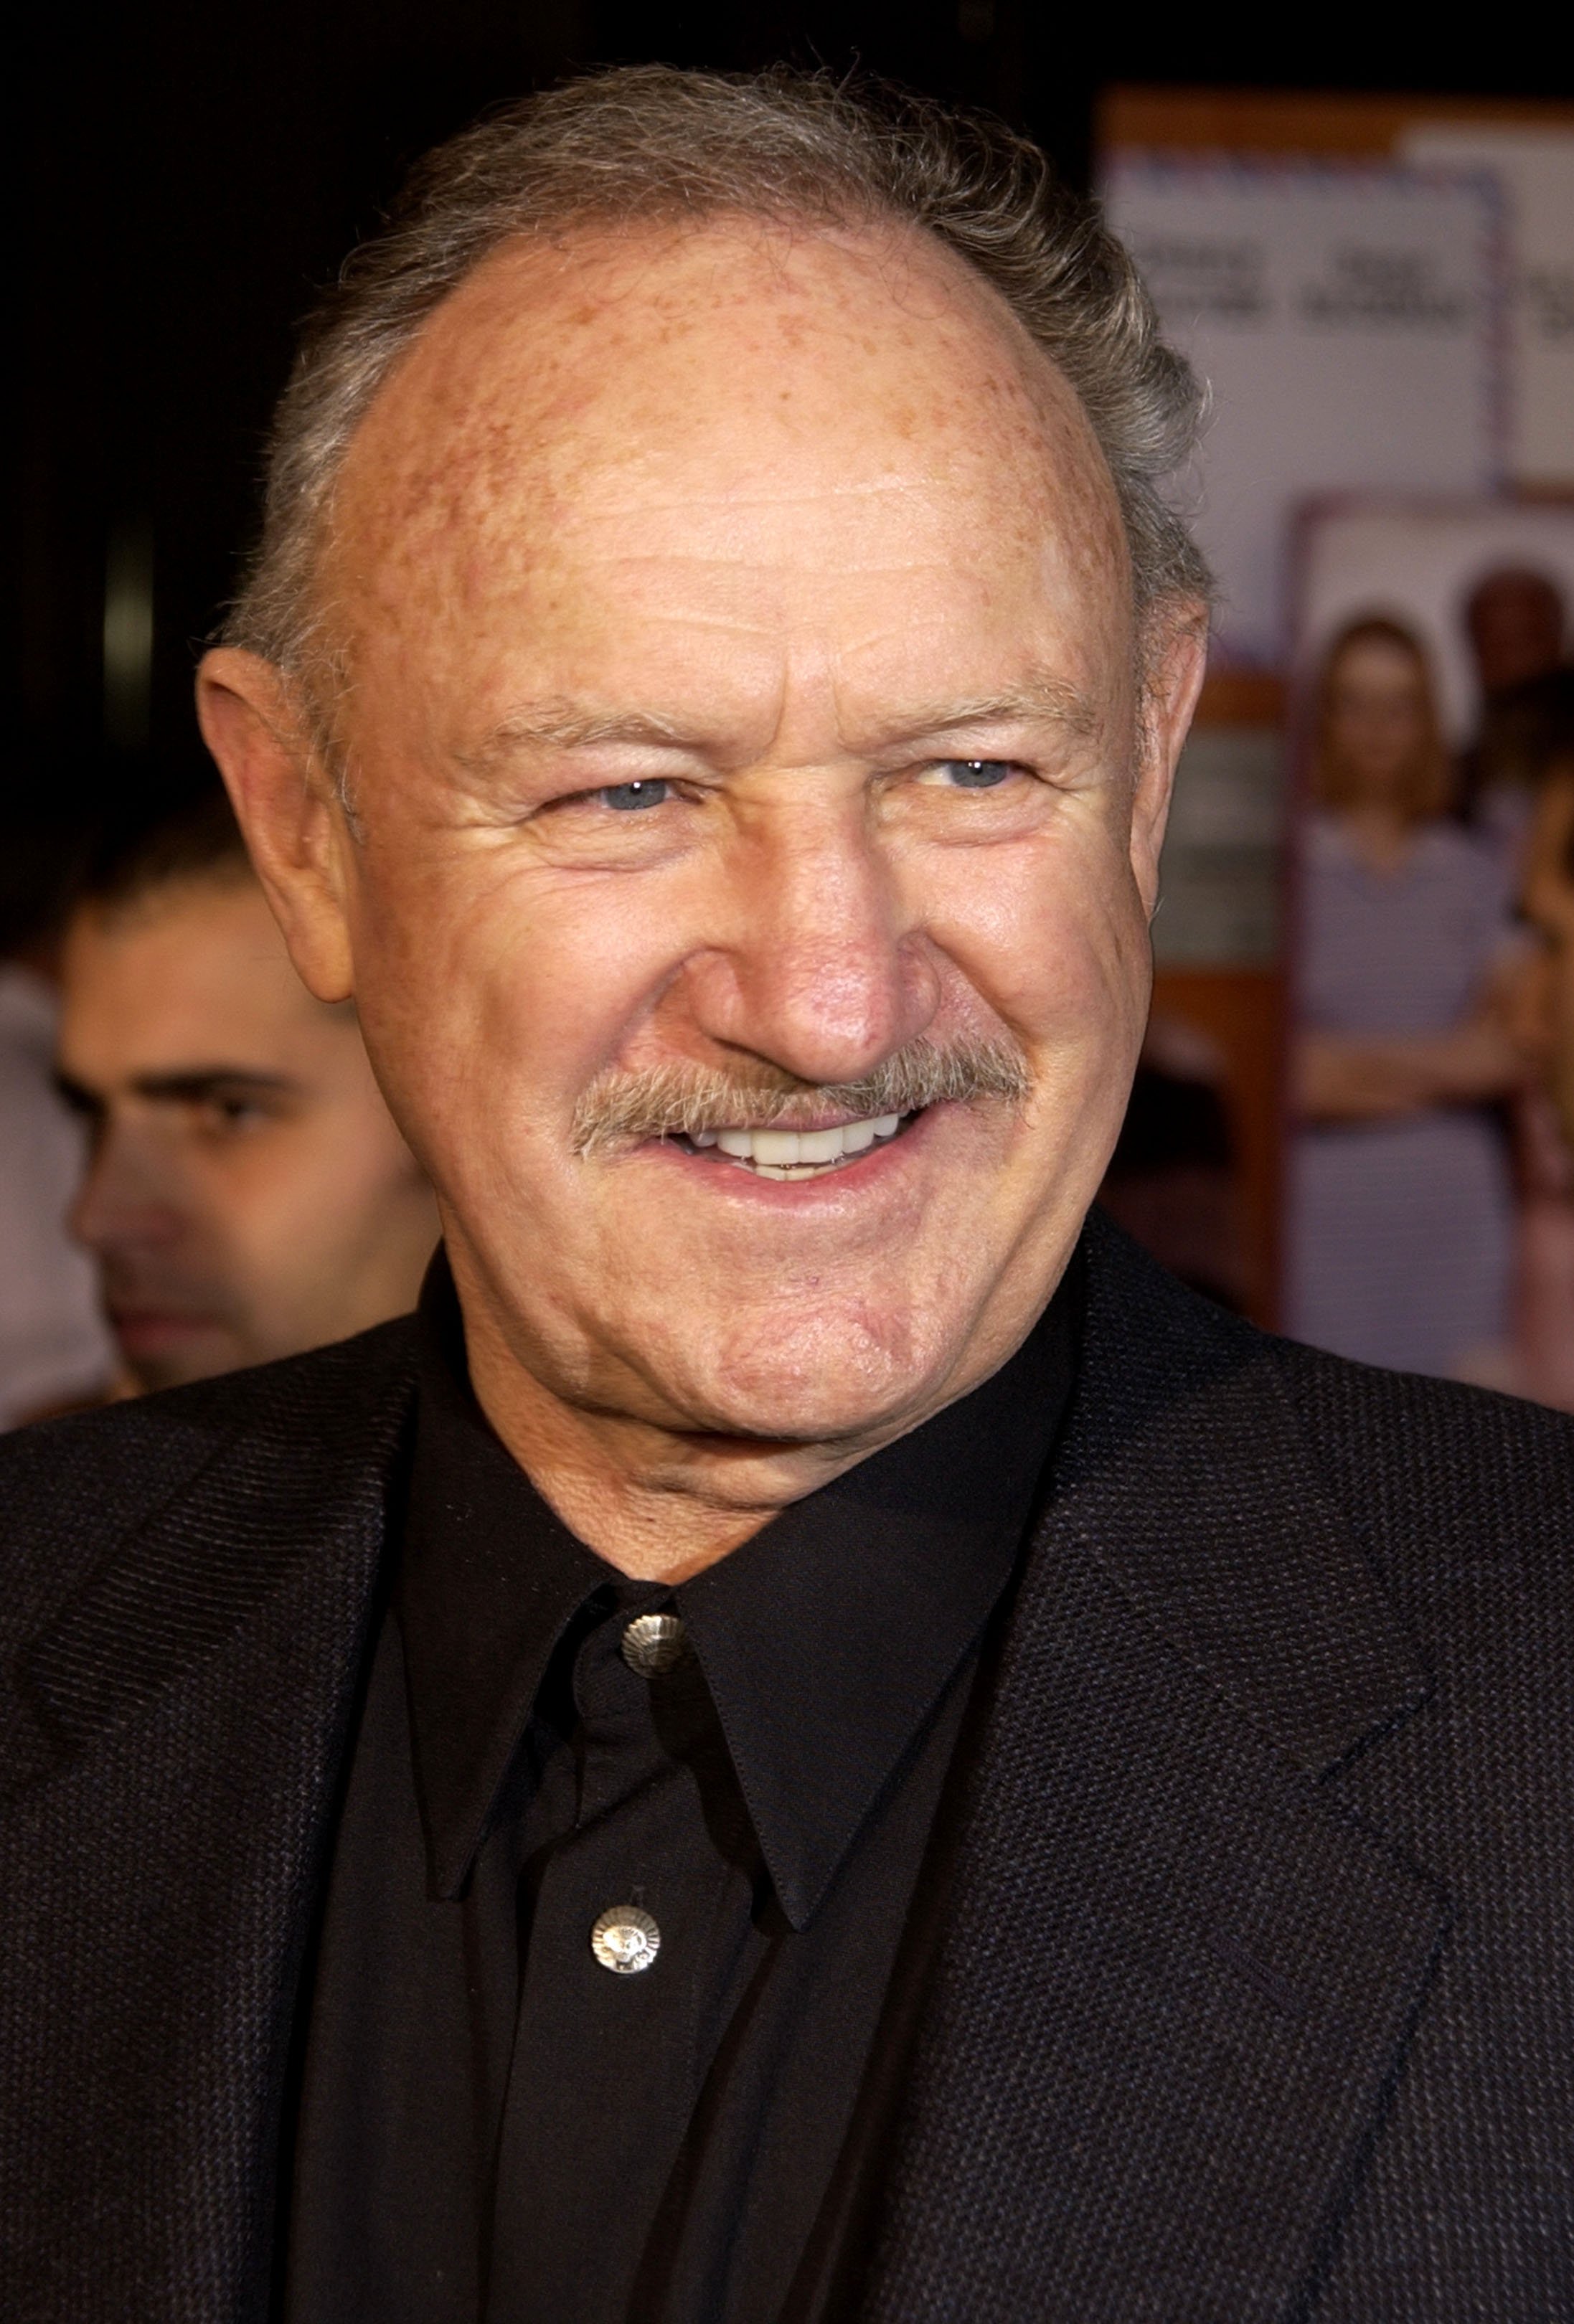 Gene Hackman during "The Royal Tenenbaums" Los Angeles Premiere at El Capitan Theatre in Hollywood, California, United States | Source: Getty Images